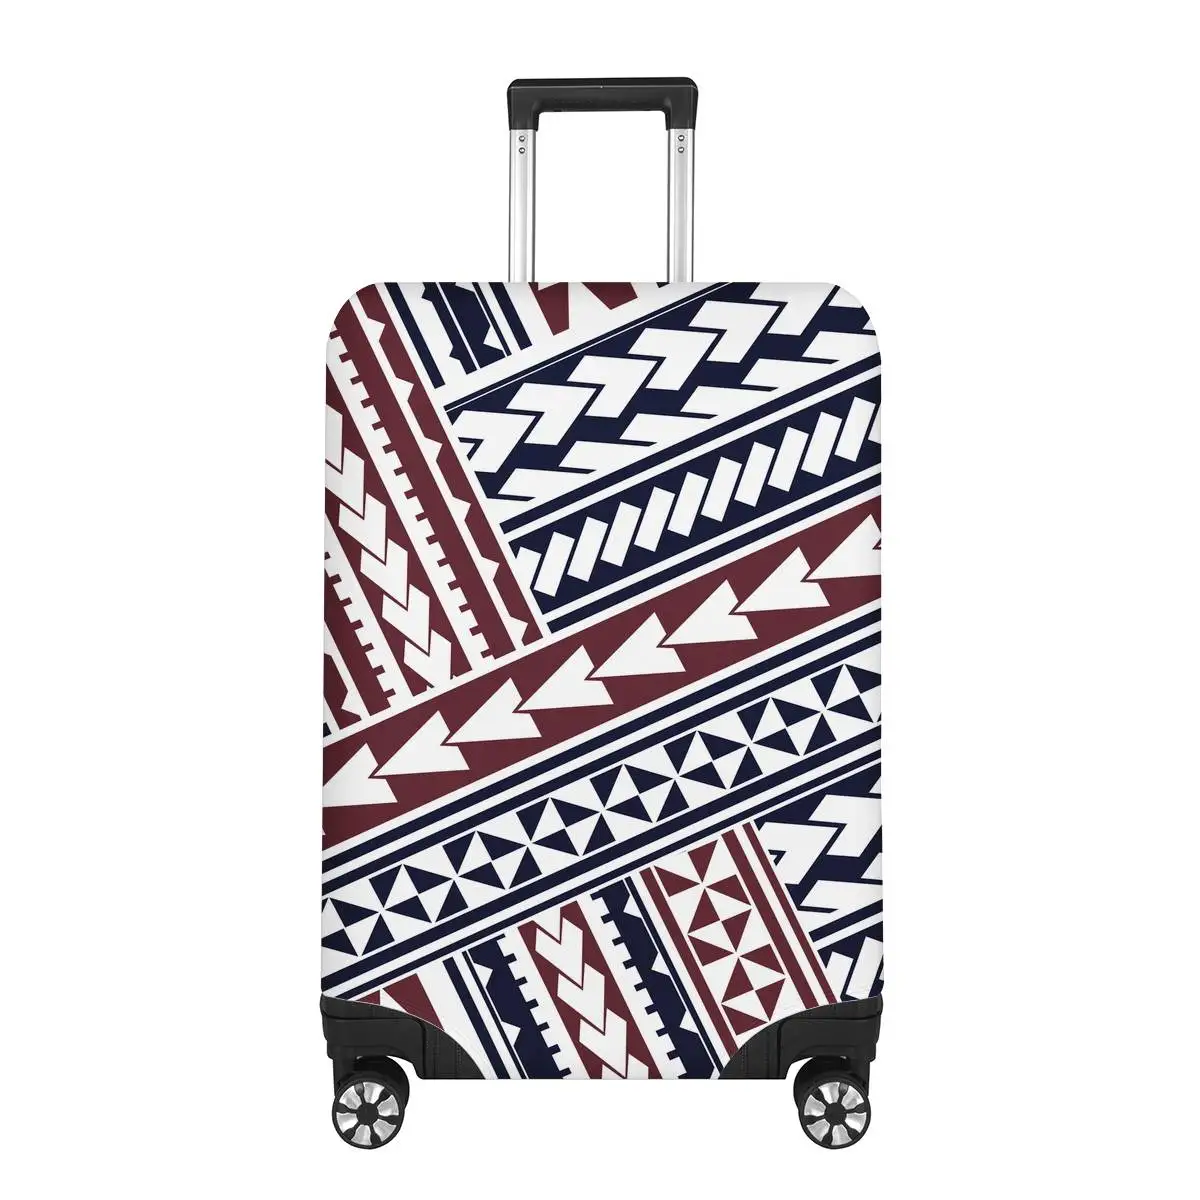 Wholesale Custom Luggage Cover Polynesian Traditional Tribal Luggage Covers  Suitcase Cover Protector - Buy Luggage Protective Cover,Luggage Cover  Protector,Suitcase Cover Luggage Product on Alibaba.com